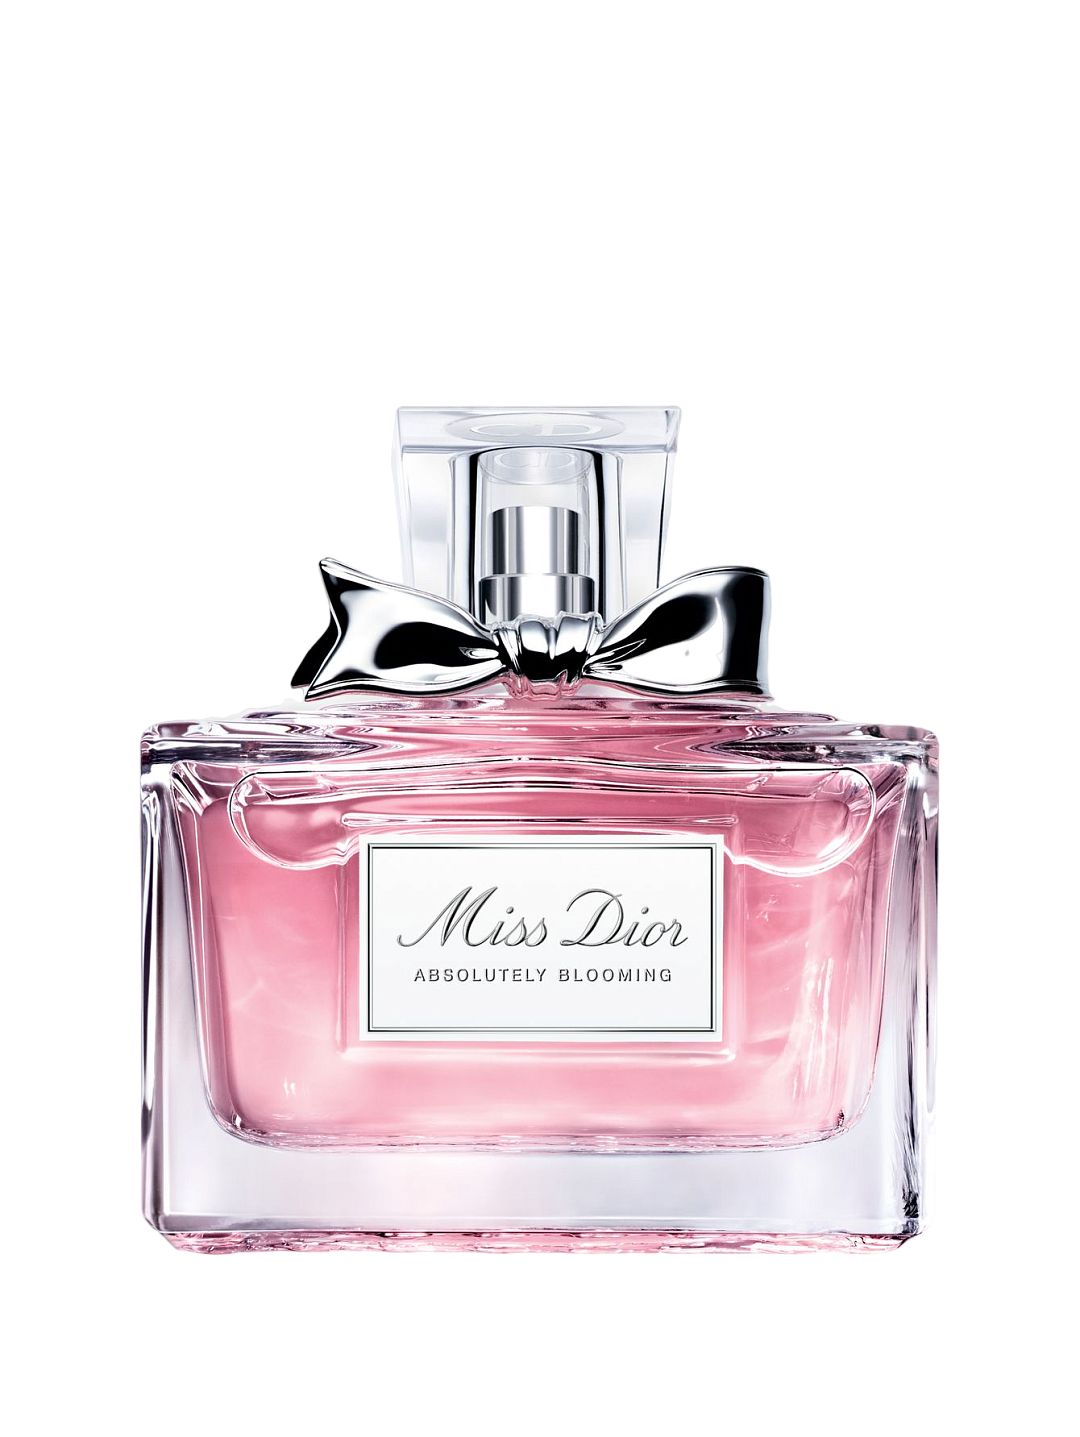 MISS DIOR ABSOLUTELY BLOOMING~Парфюмерная вода